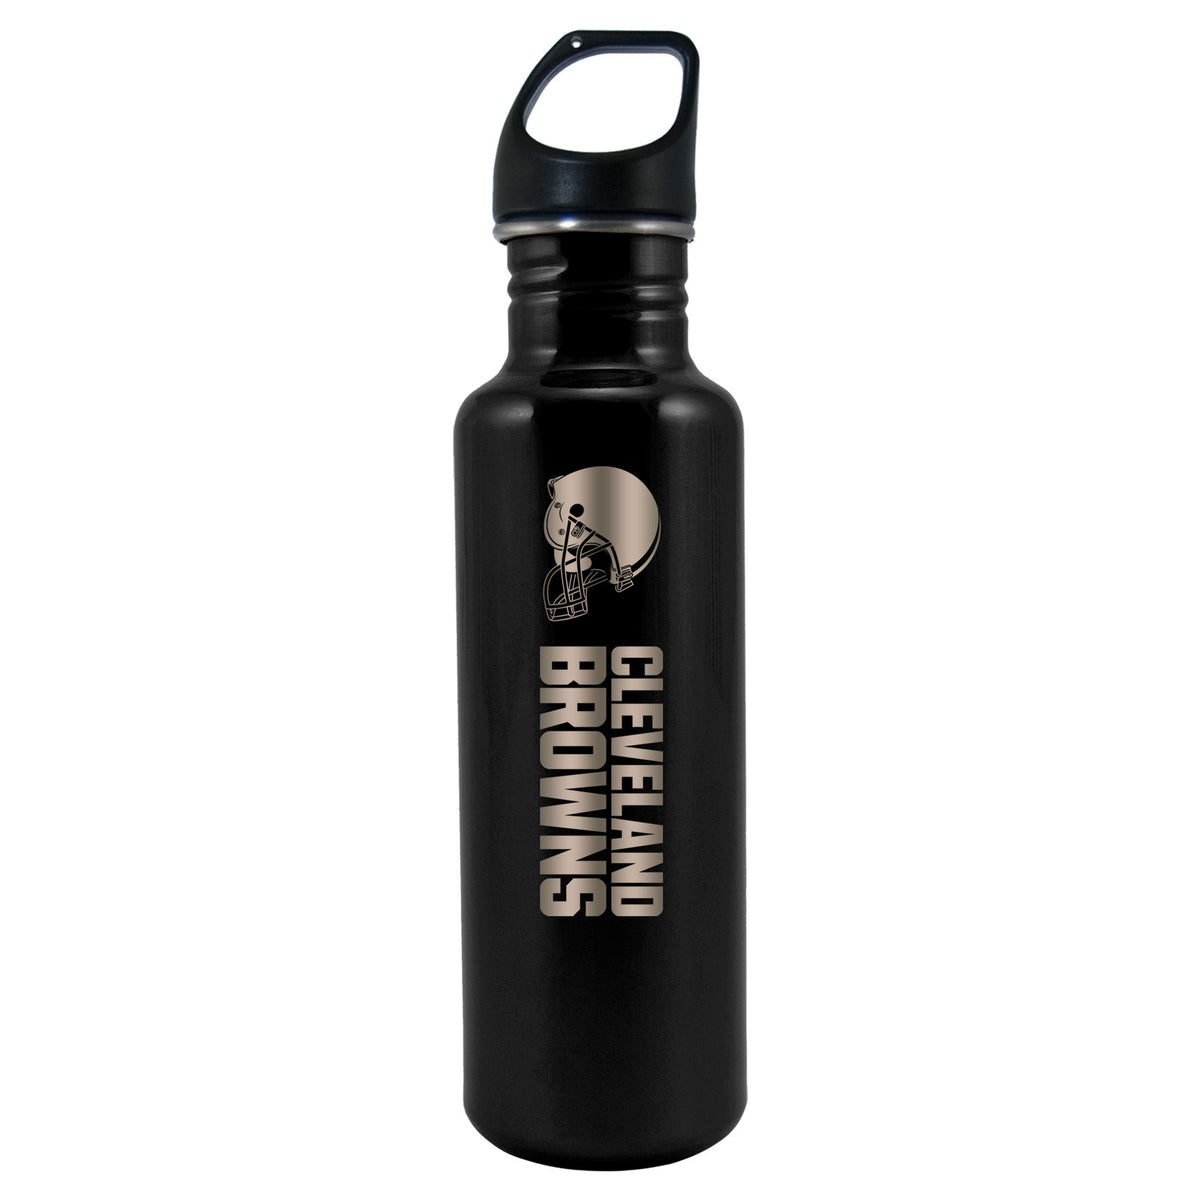 Clevland Browns Stainless Steel Water Bottle (750ml/26oz.)